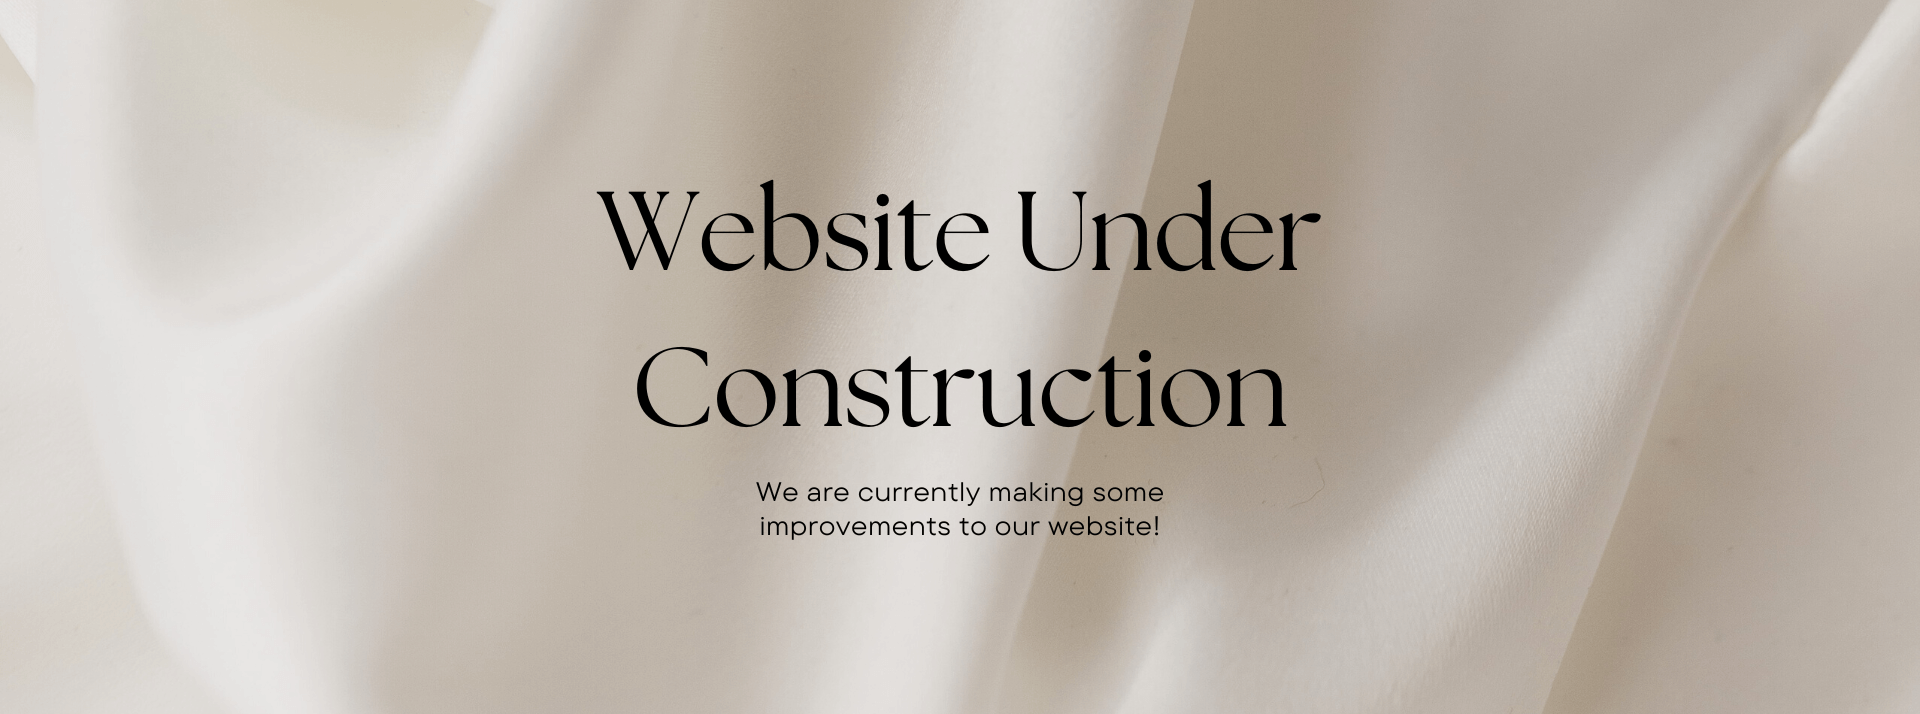 REEF - New Website Under Construction- Rocklin Educational Excellence Foundation (1)